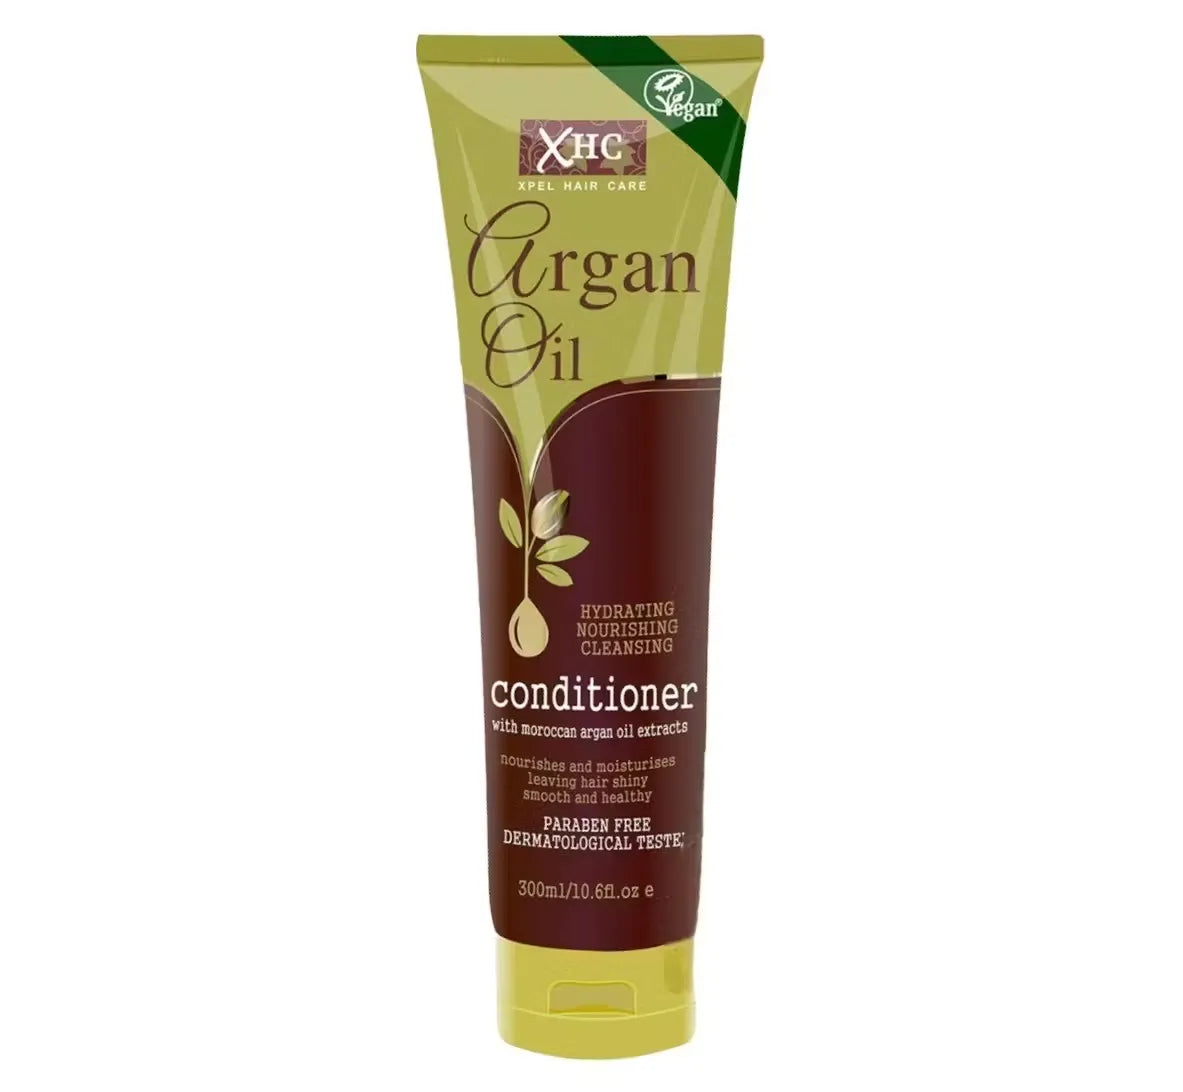 Bottle of Argan Oil Hydrating Conditioner (300ml) with argan oil extract, emphasizing smooth and shiny hair. May also include a hand pouring the conditioner or hair styled after using it.